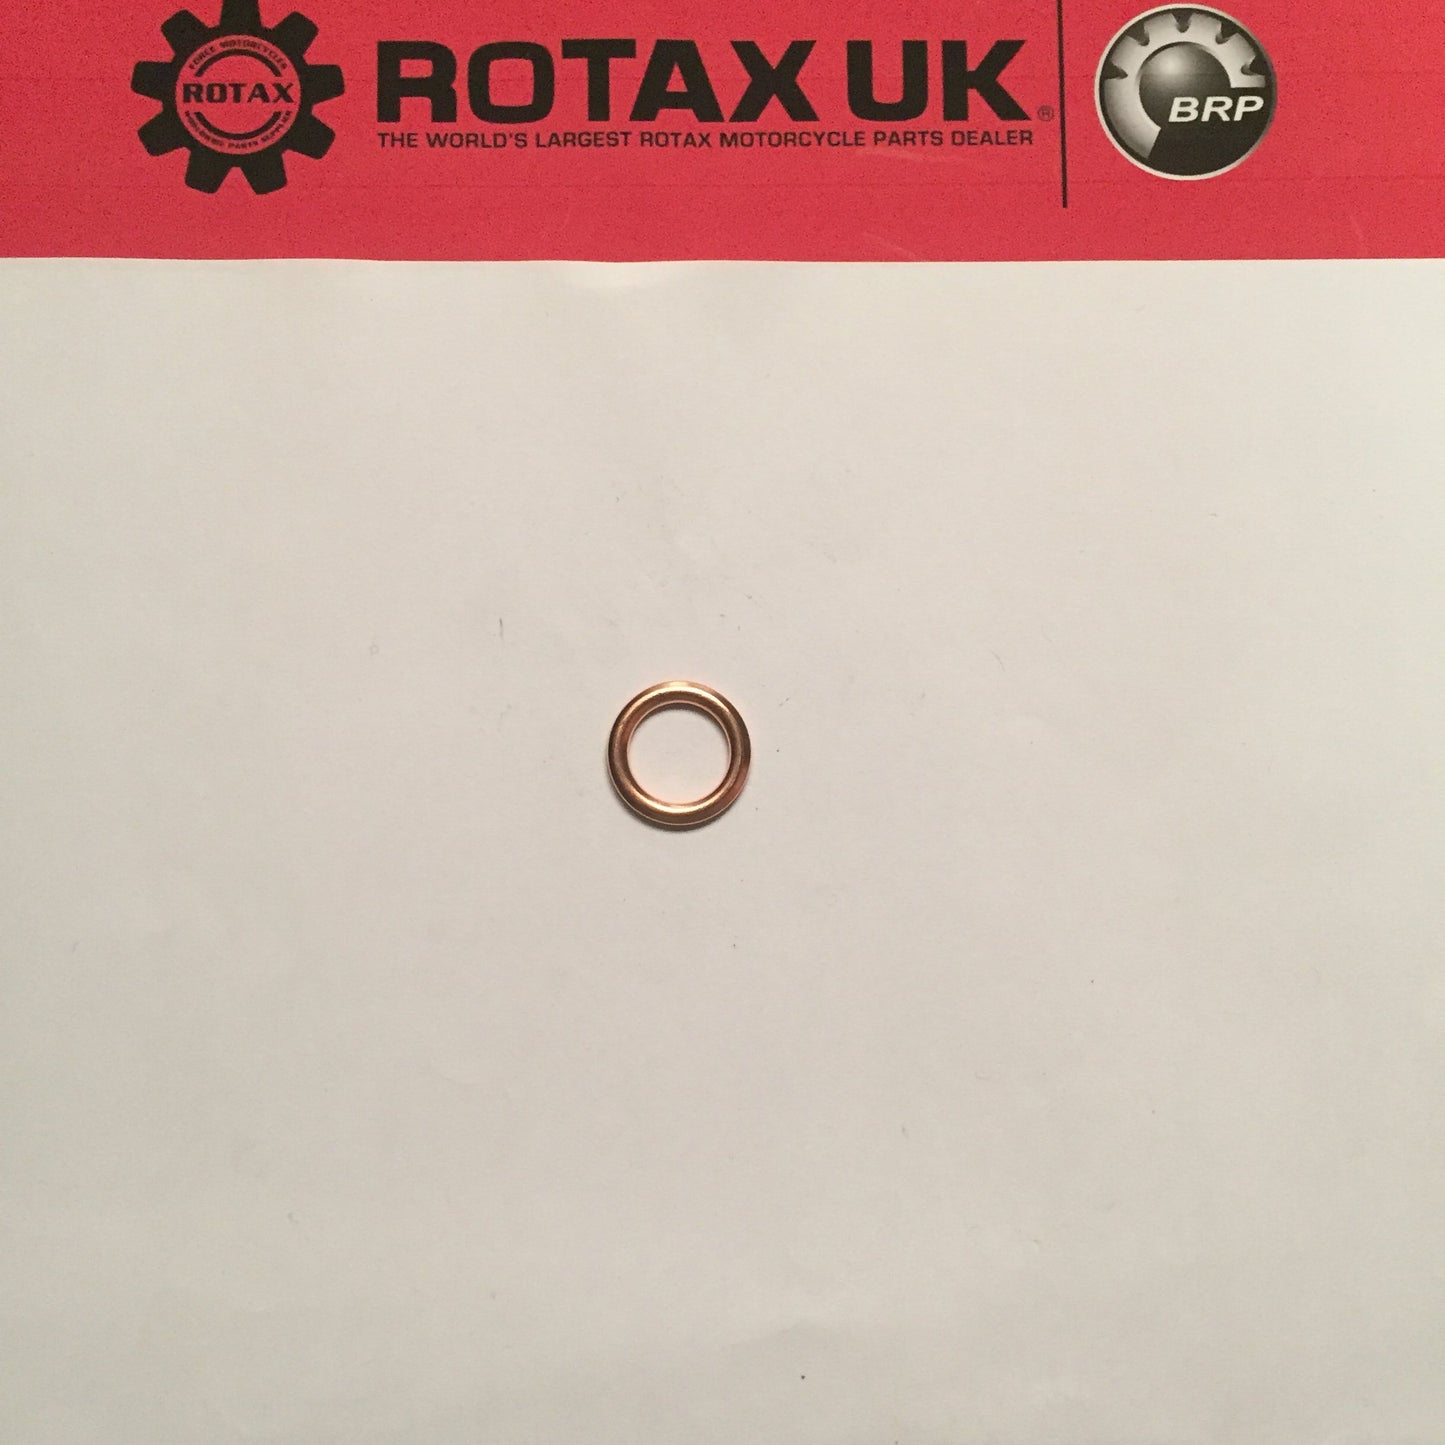 250010 - Gasket Ring - C12x18mm for engine types: 275, 348, 504, 560, 604, 605, 677, 912, 913, 914.